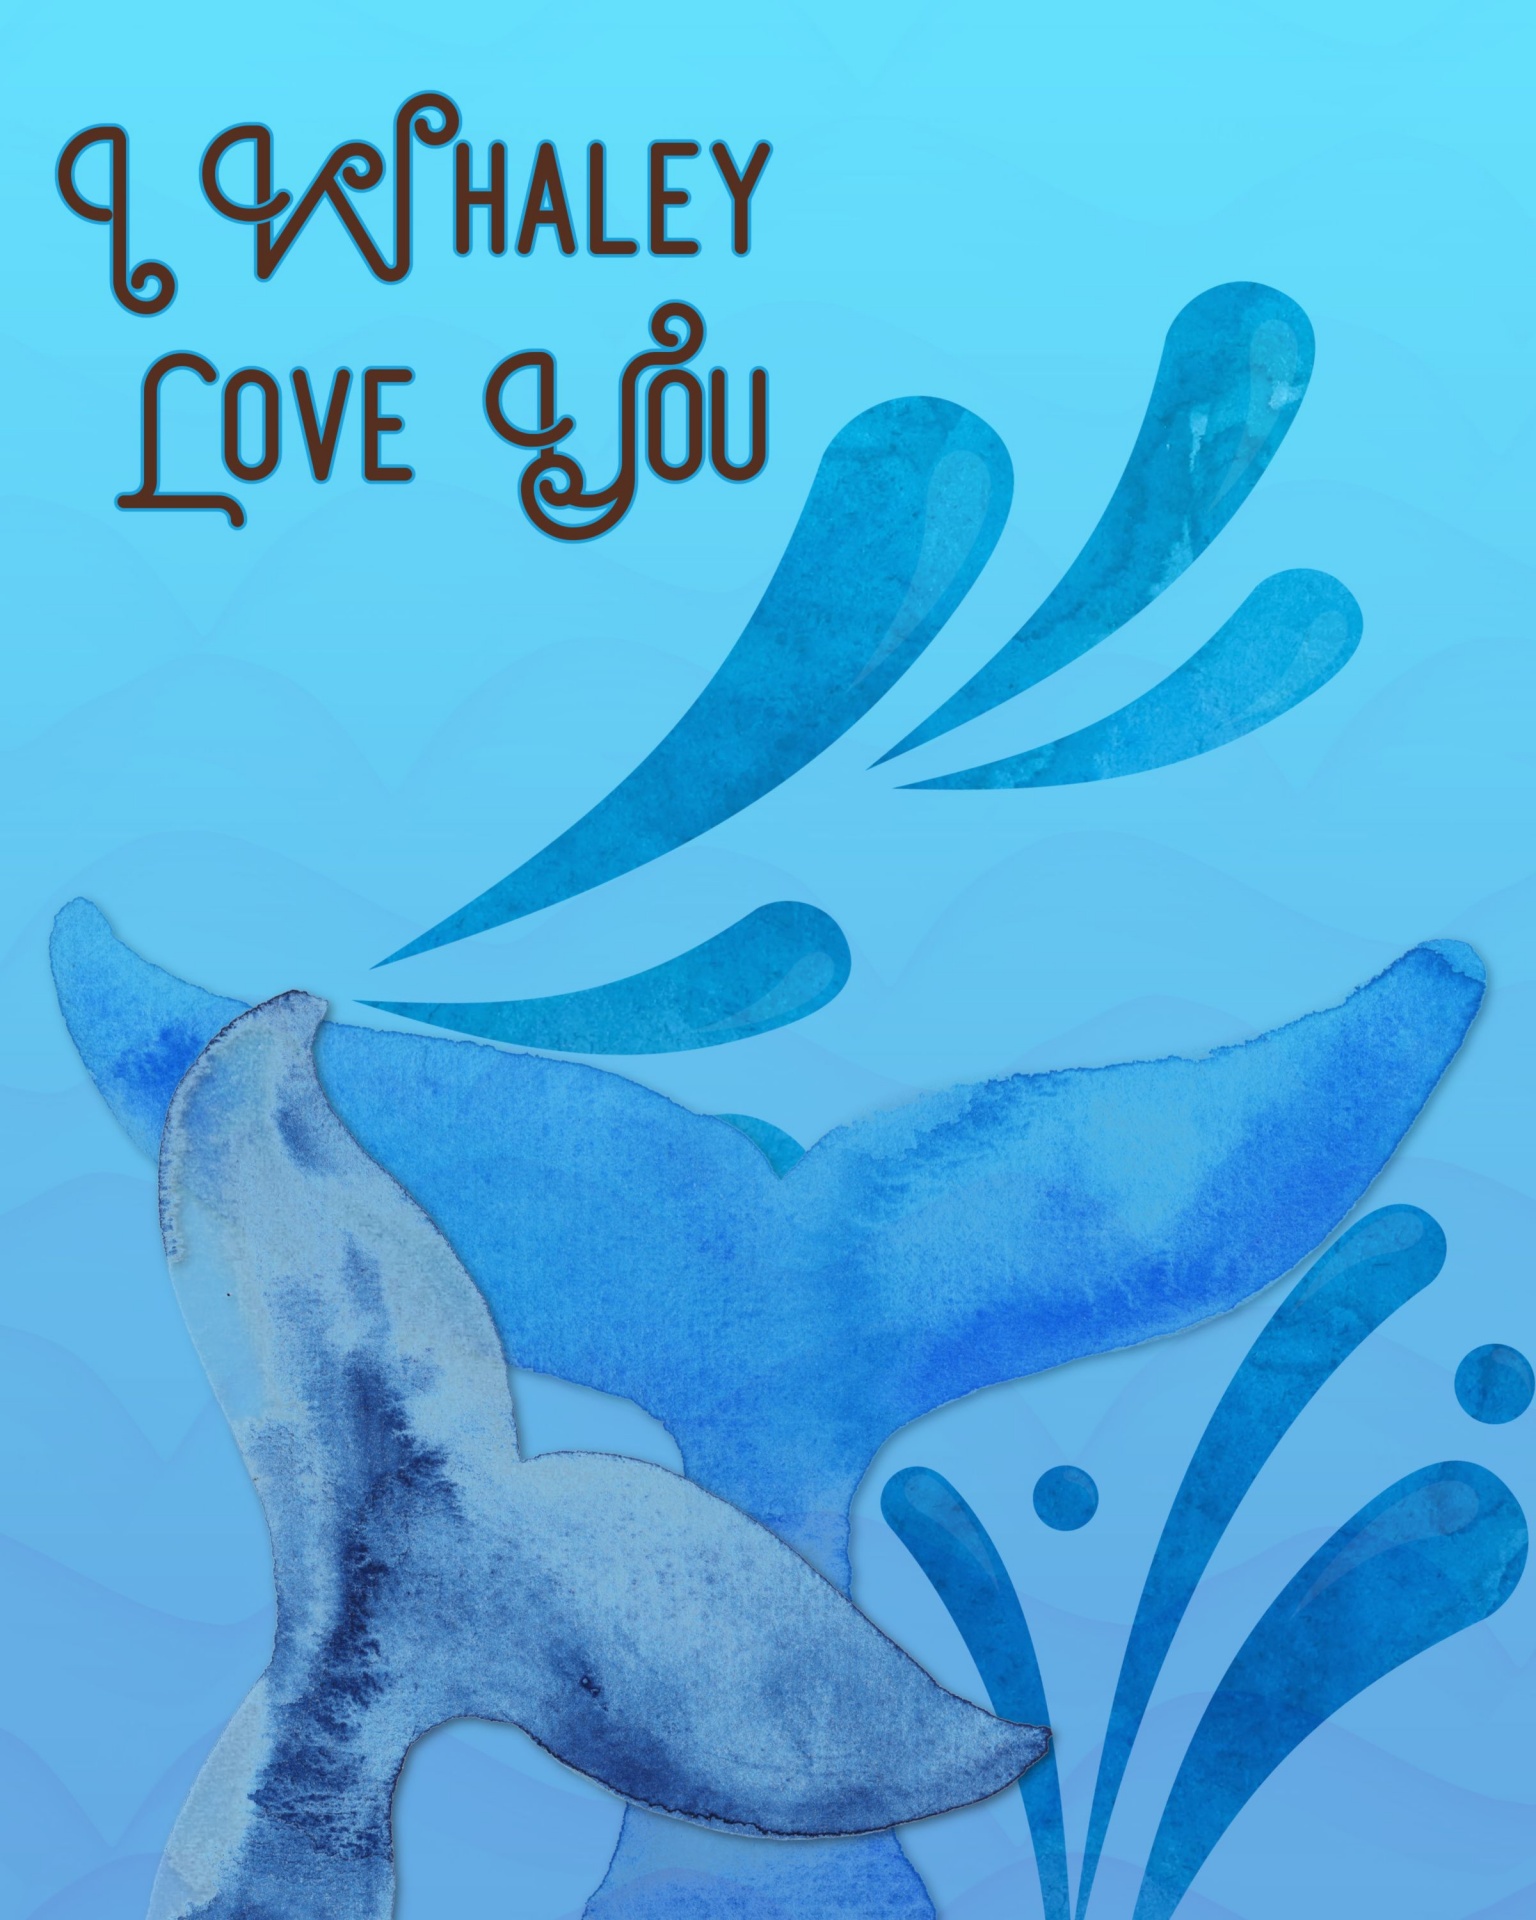 I whaley love you whale tails illustration for Valentine's Day